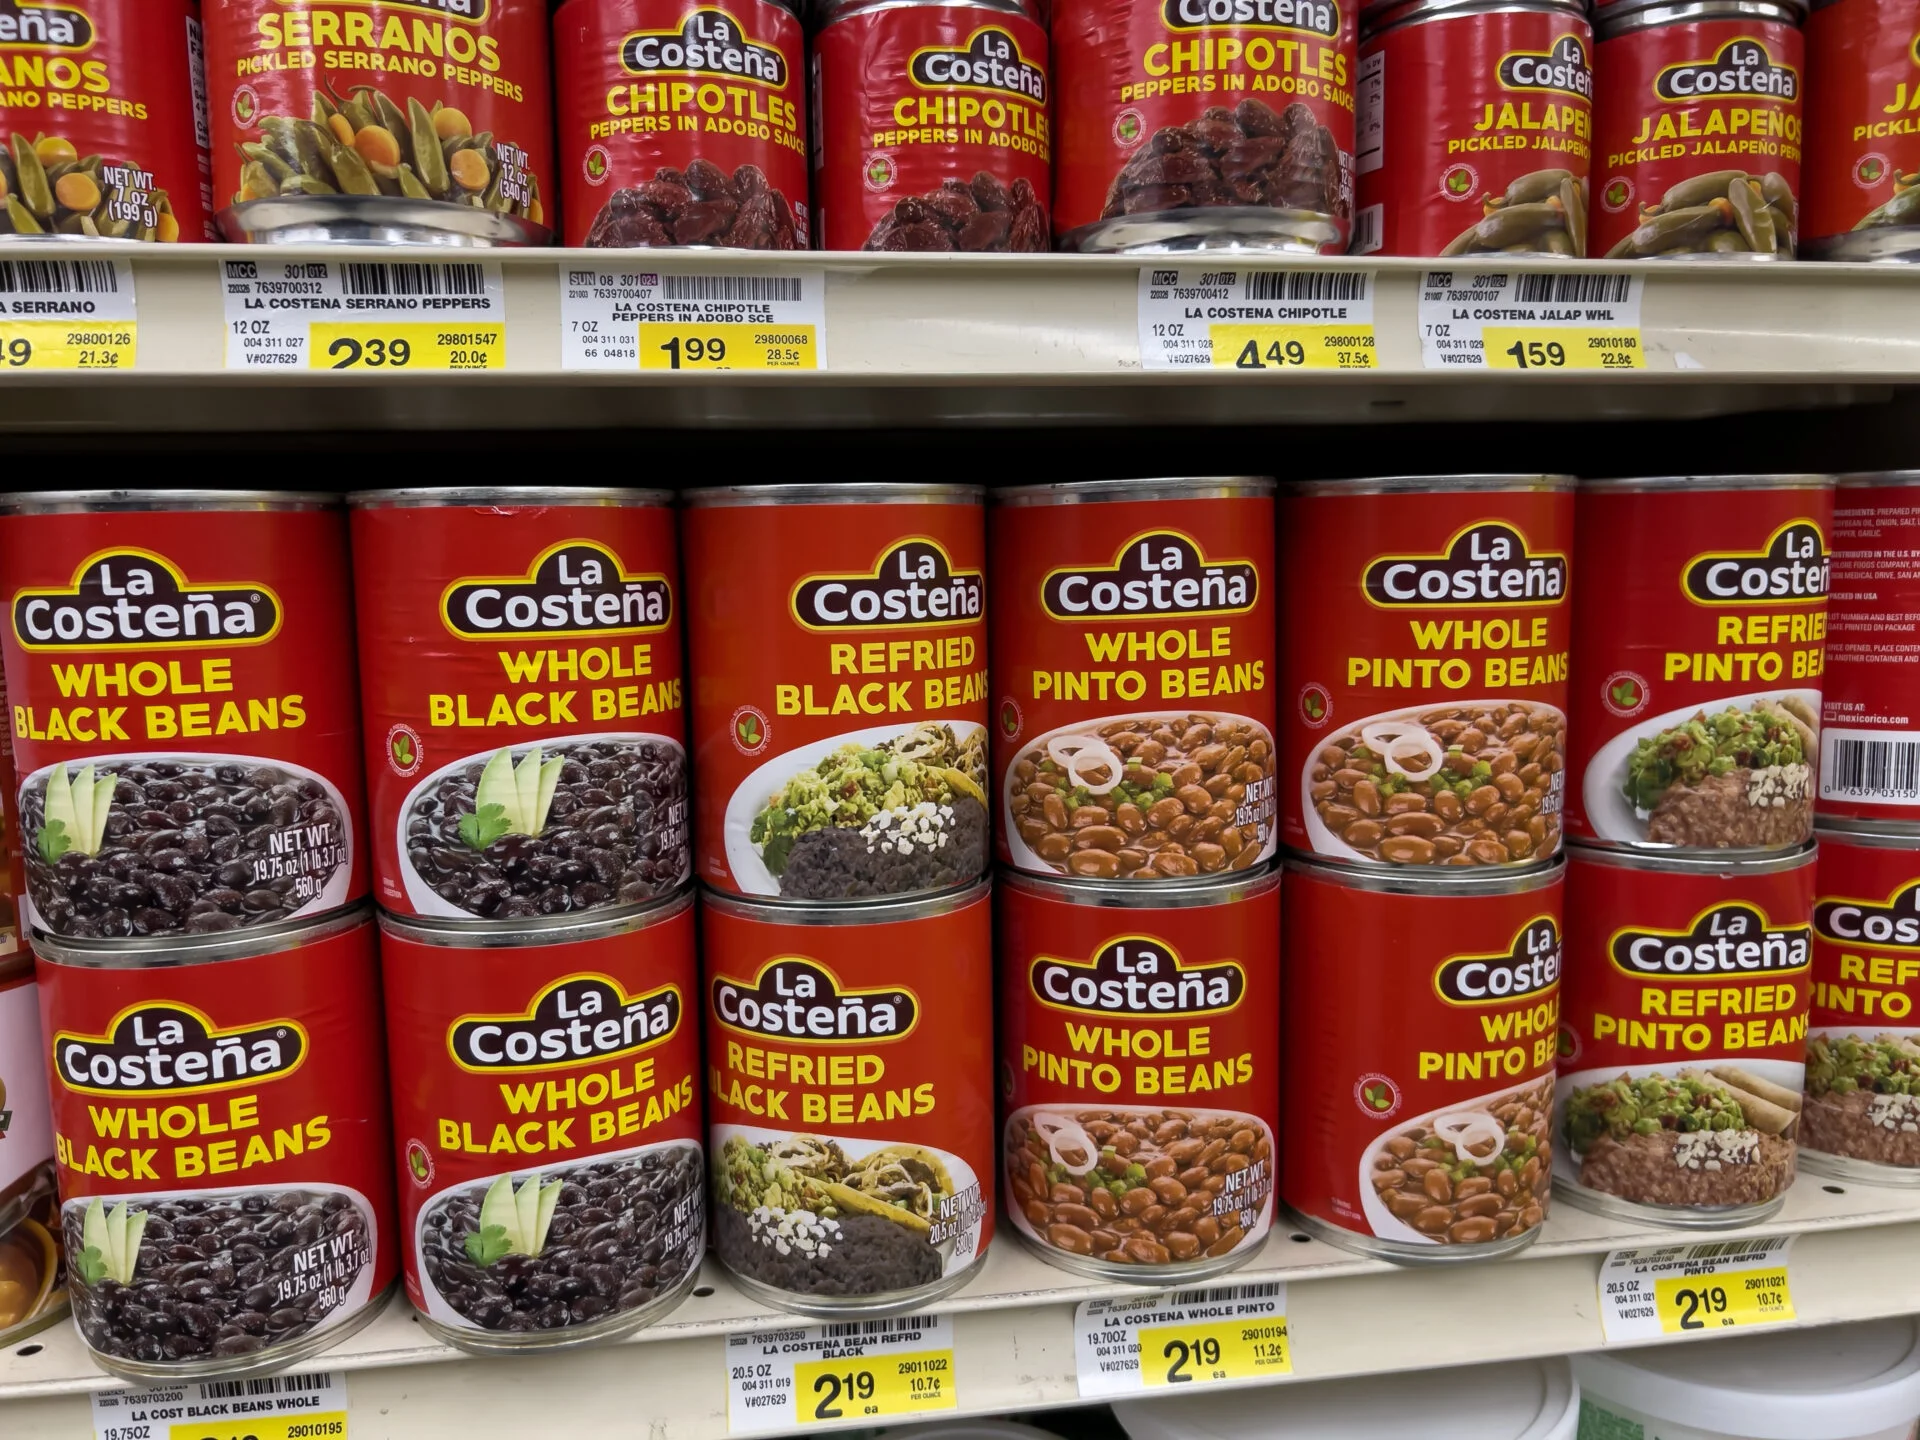 Canned beans found in a grocery store likely containing a type of bisphenol plasticizer